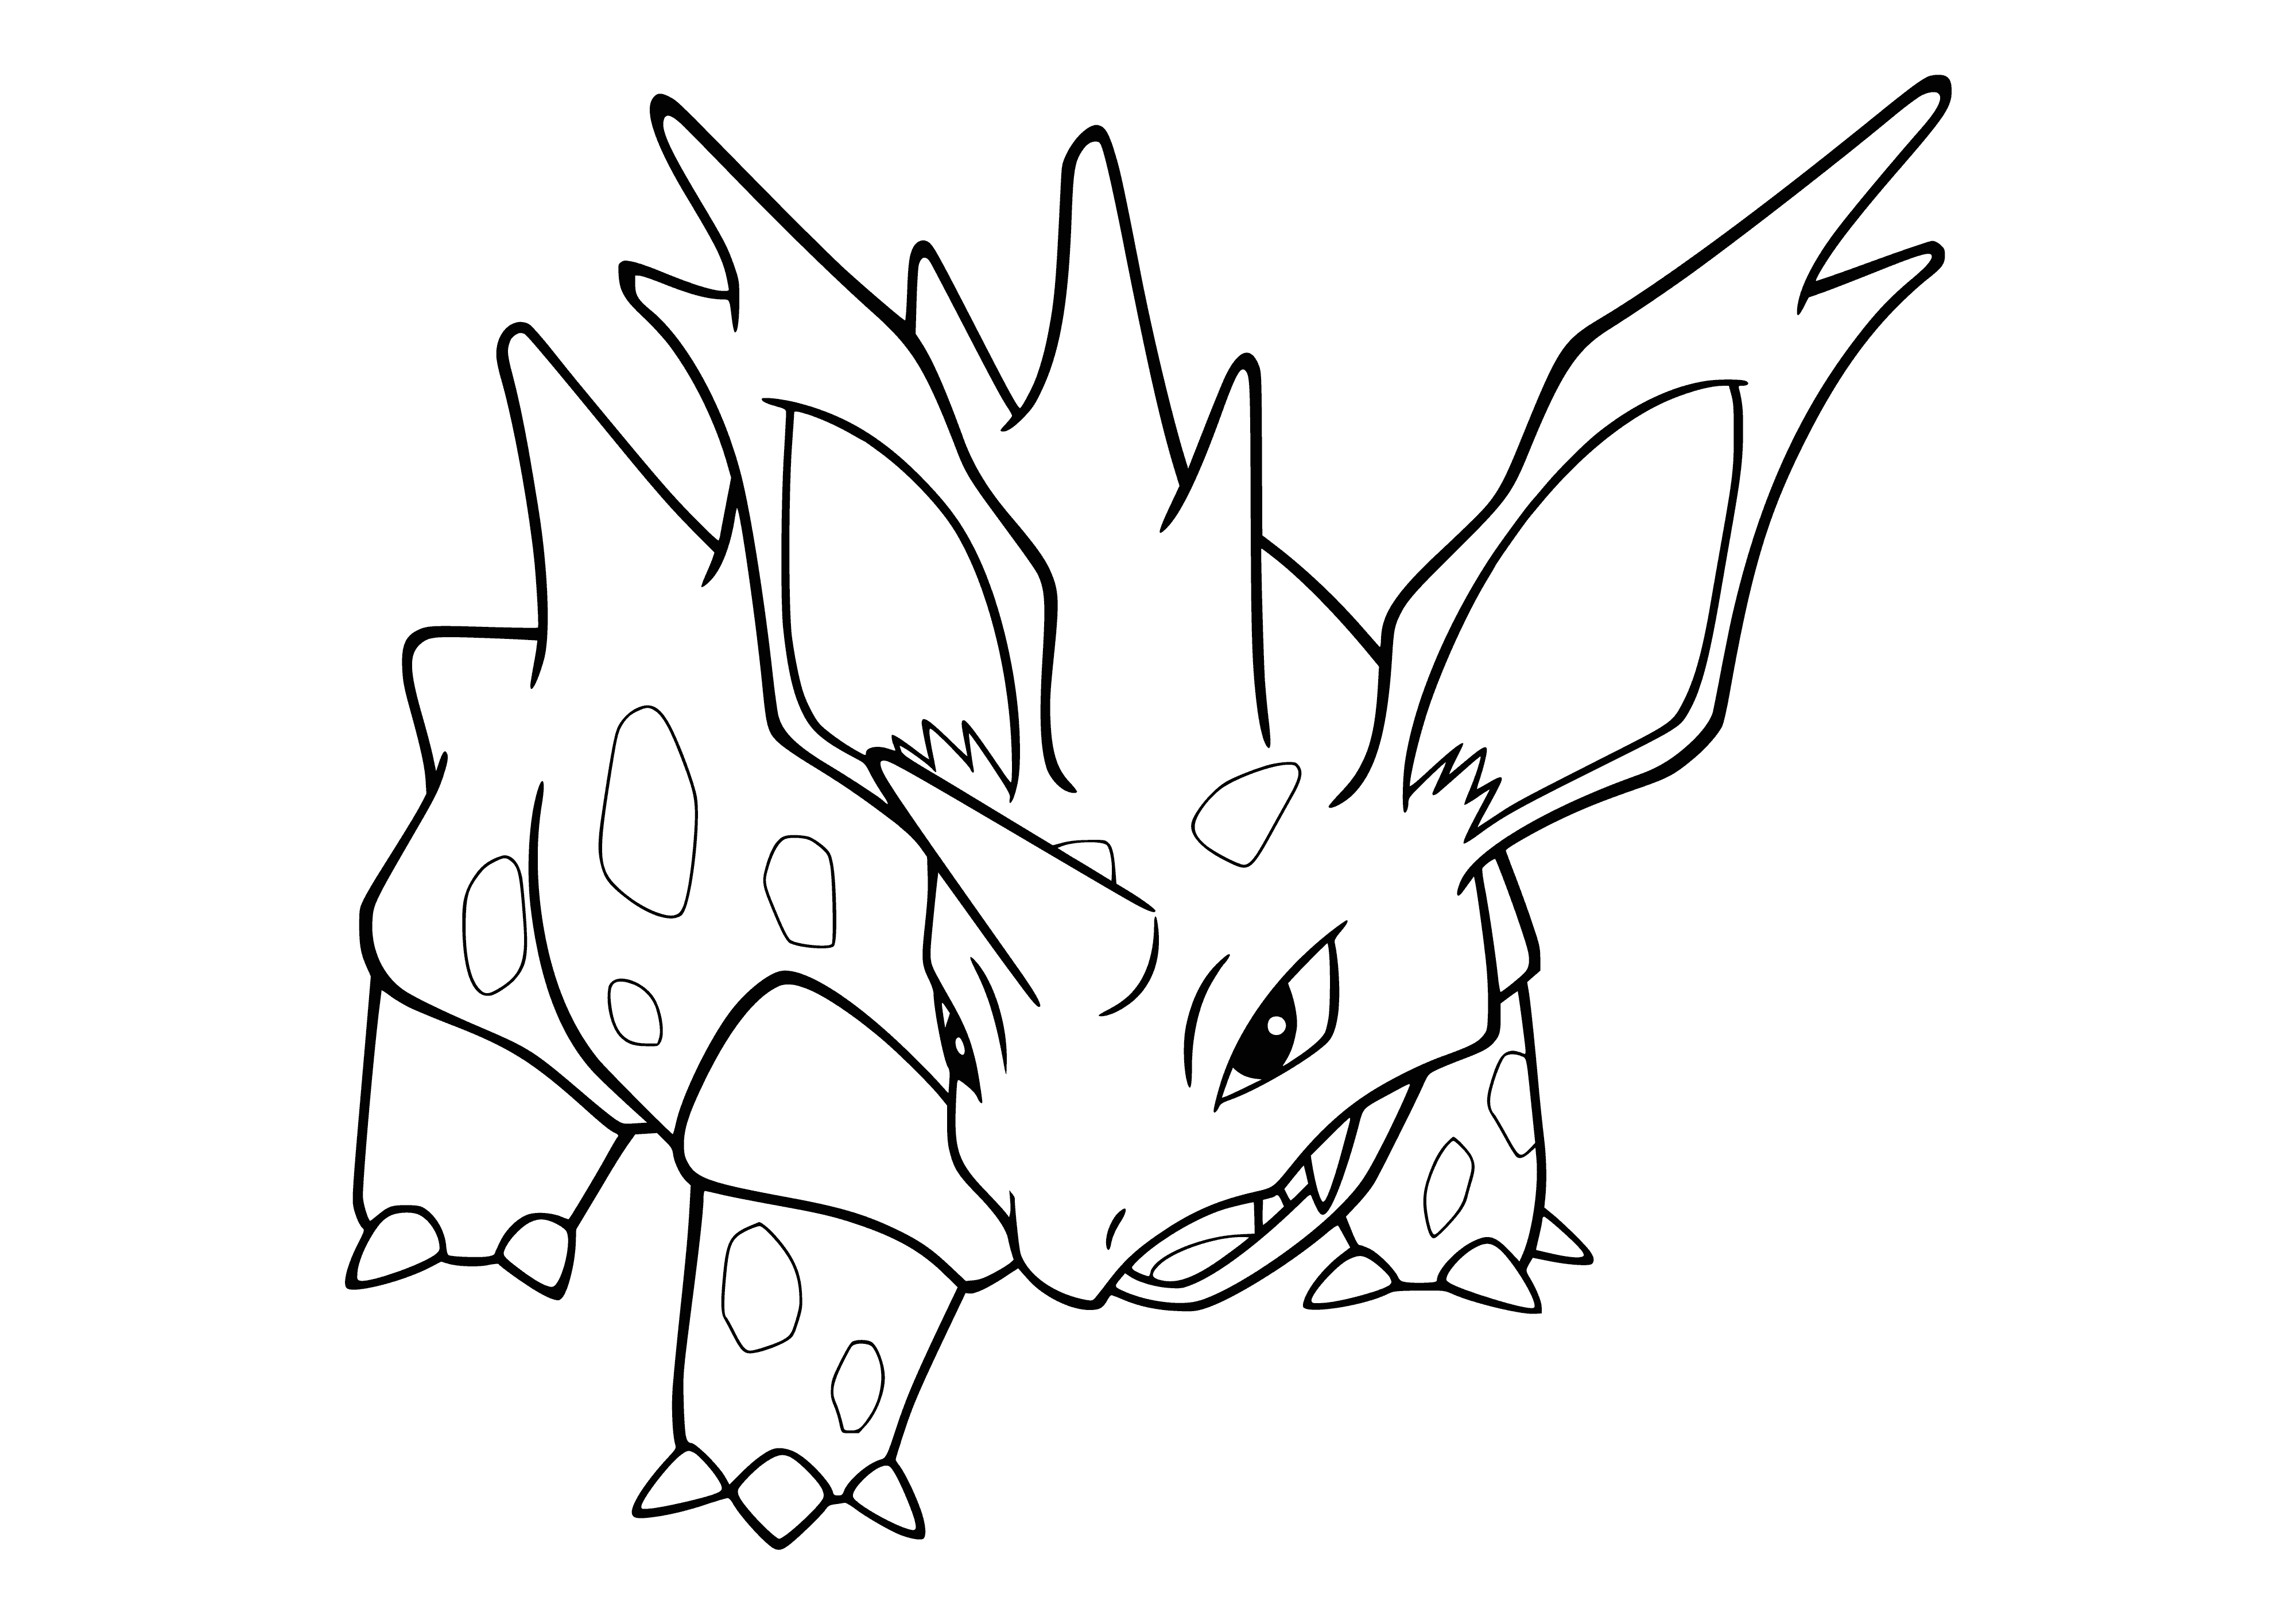 coloring page: Blue, spiky pokémon w/ red eyes, large horn & small triangular teeth. #Pokemon #Legendary